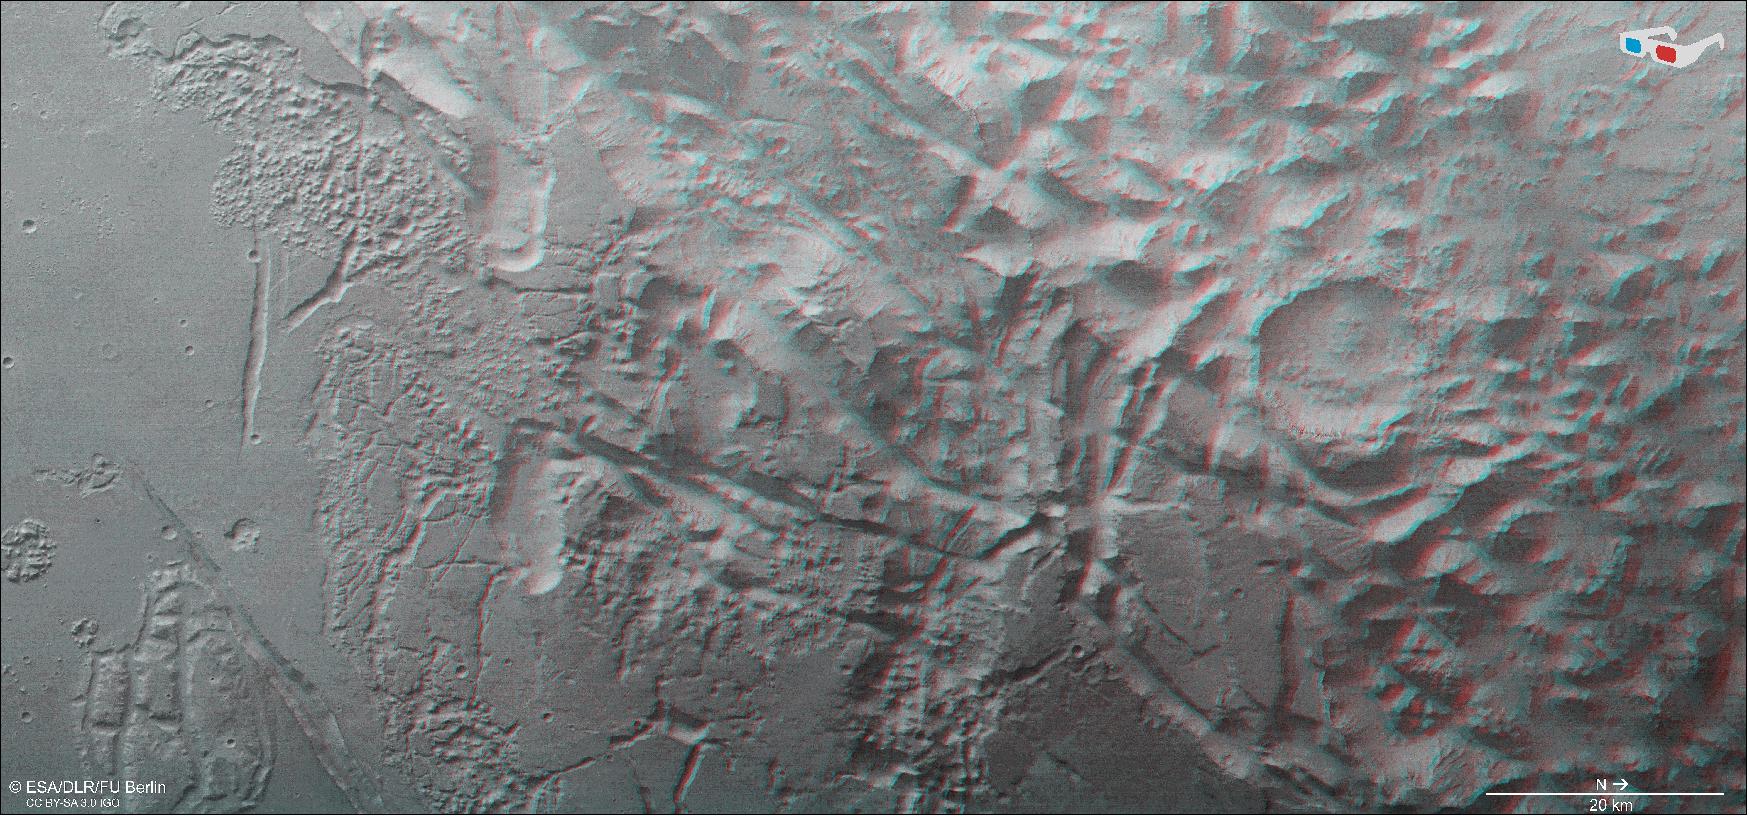 Figure 33: This image shows Aurorae Chaos, a large area of chaotic terrain located in the Margaritifer Terra region on Mars, in 3D when viewed using red-green or red-blue glasses. This anaglyph was derived from data obtained by the nadir and stereo channels of the High Resolution Stereo Camera (HRSC) on ESA's Mars Express during spacecraft orbit 18765. It covers a part of the martian surface centered at about 327ºE/11ºS. North is to the right (image credit: ESA/DLR/FU Berlin, CC BY-SA 3.0 IGO)